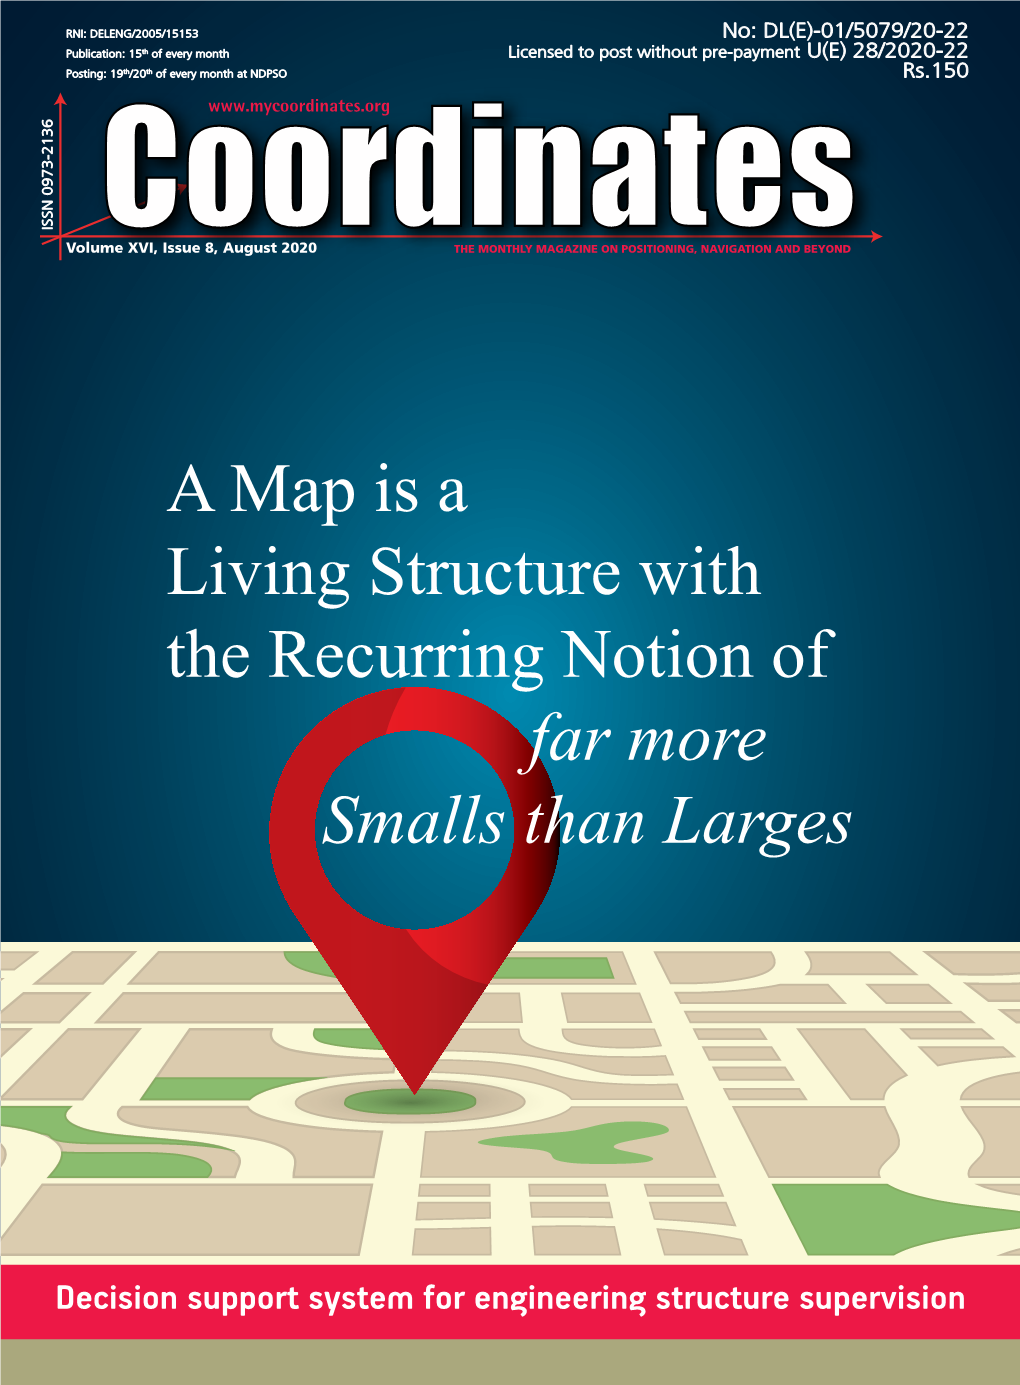 A Map Is a Living Structure with the Recurring Notion of Far More Smalls Than Larges